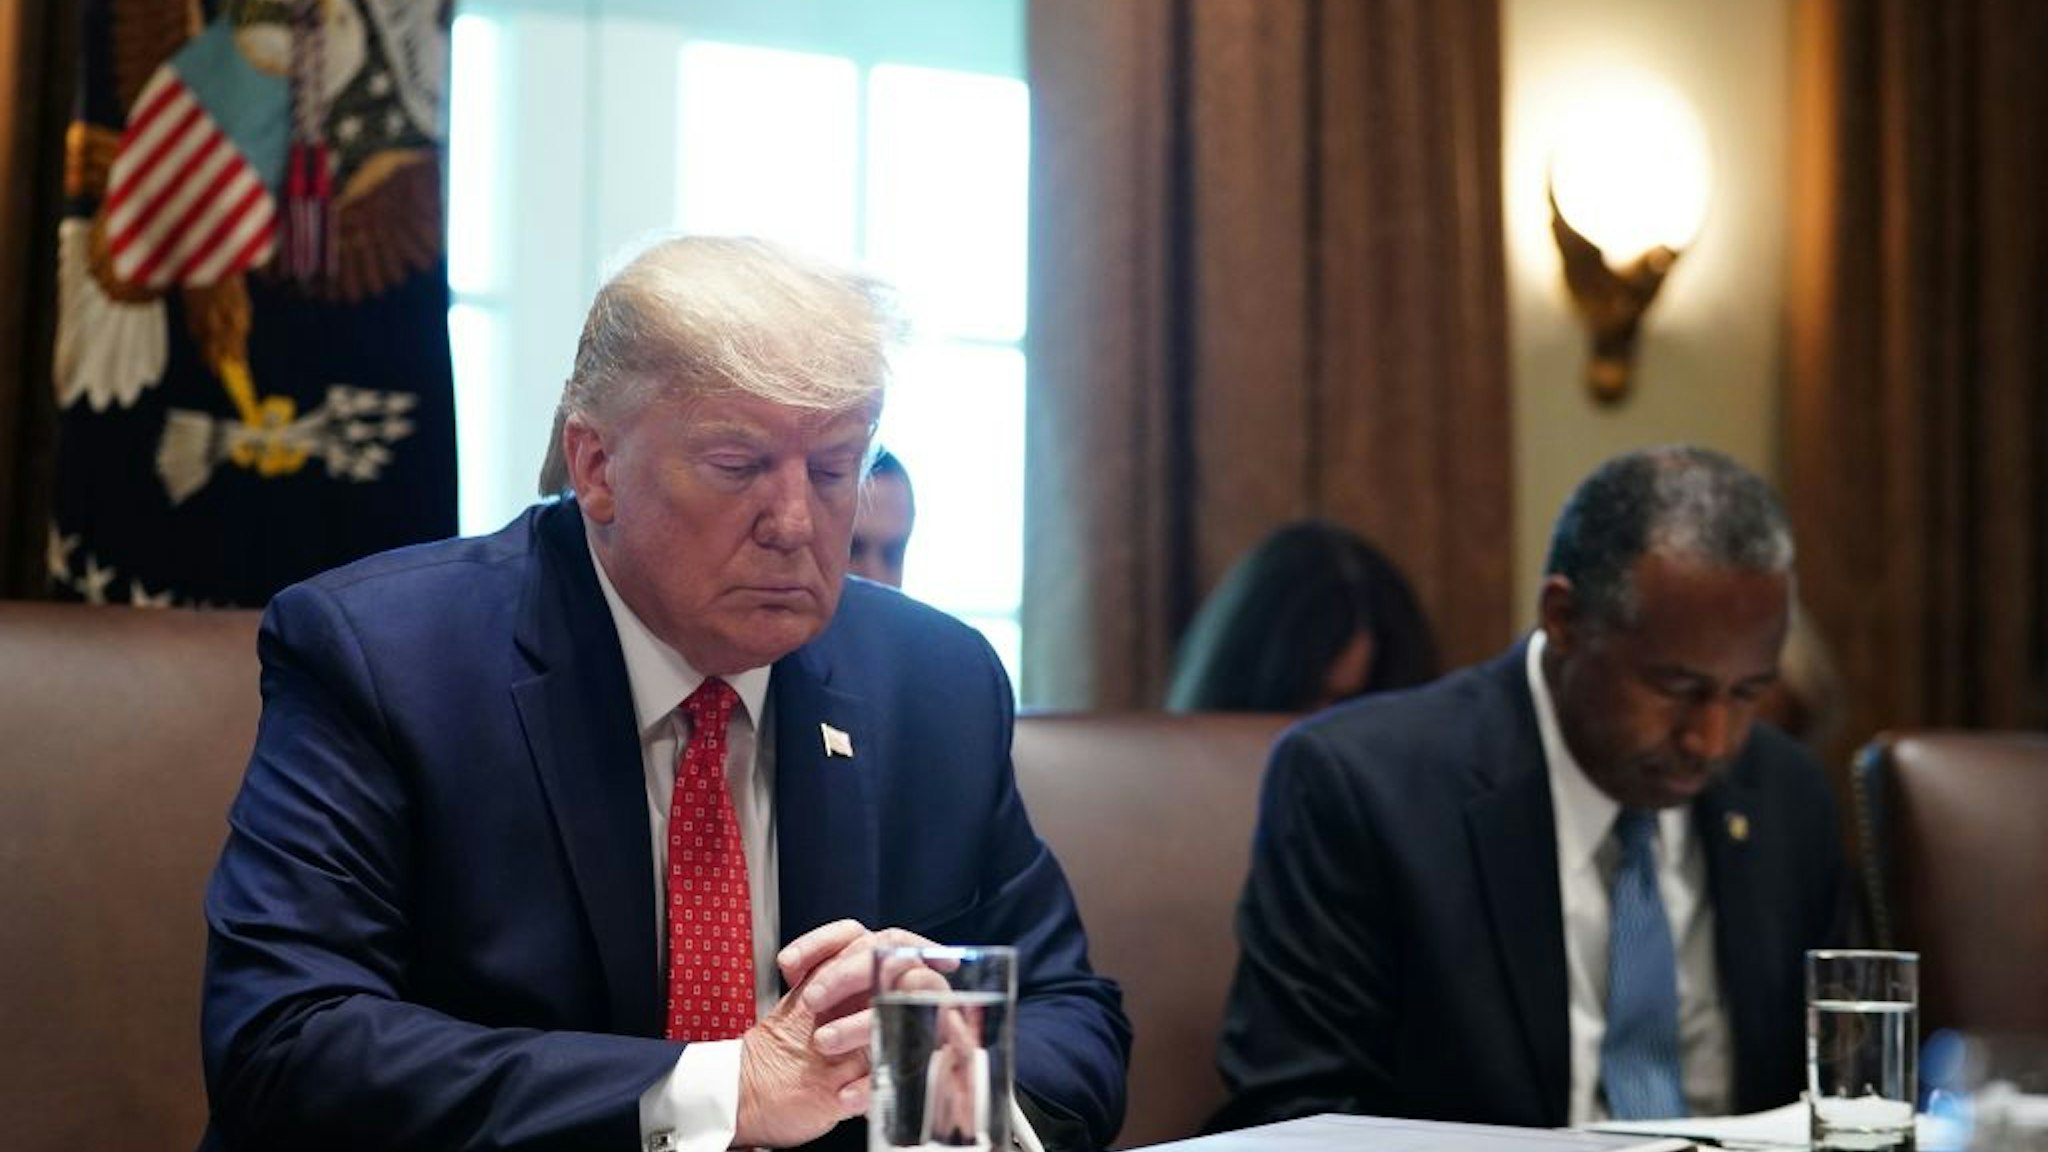 US President Donald Trump prays next to Ben Carson, Secretary of Housing and Urban Development as they take part in a cabinet meeting in the Cabinet Room of the White House in Washington, DC on November 19, 2019.